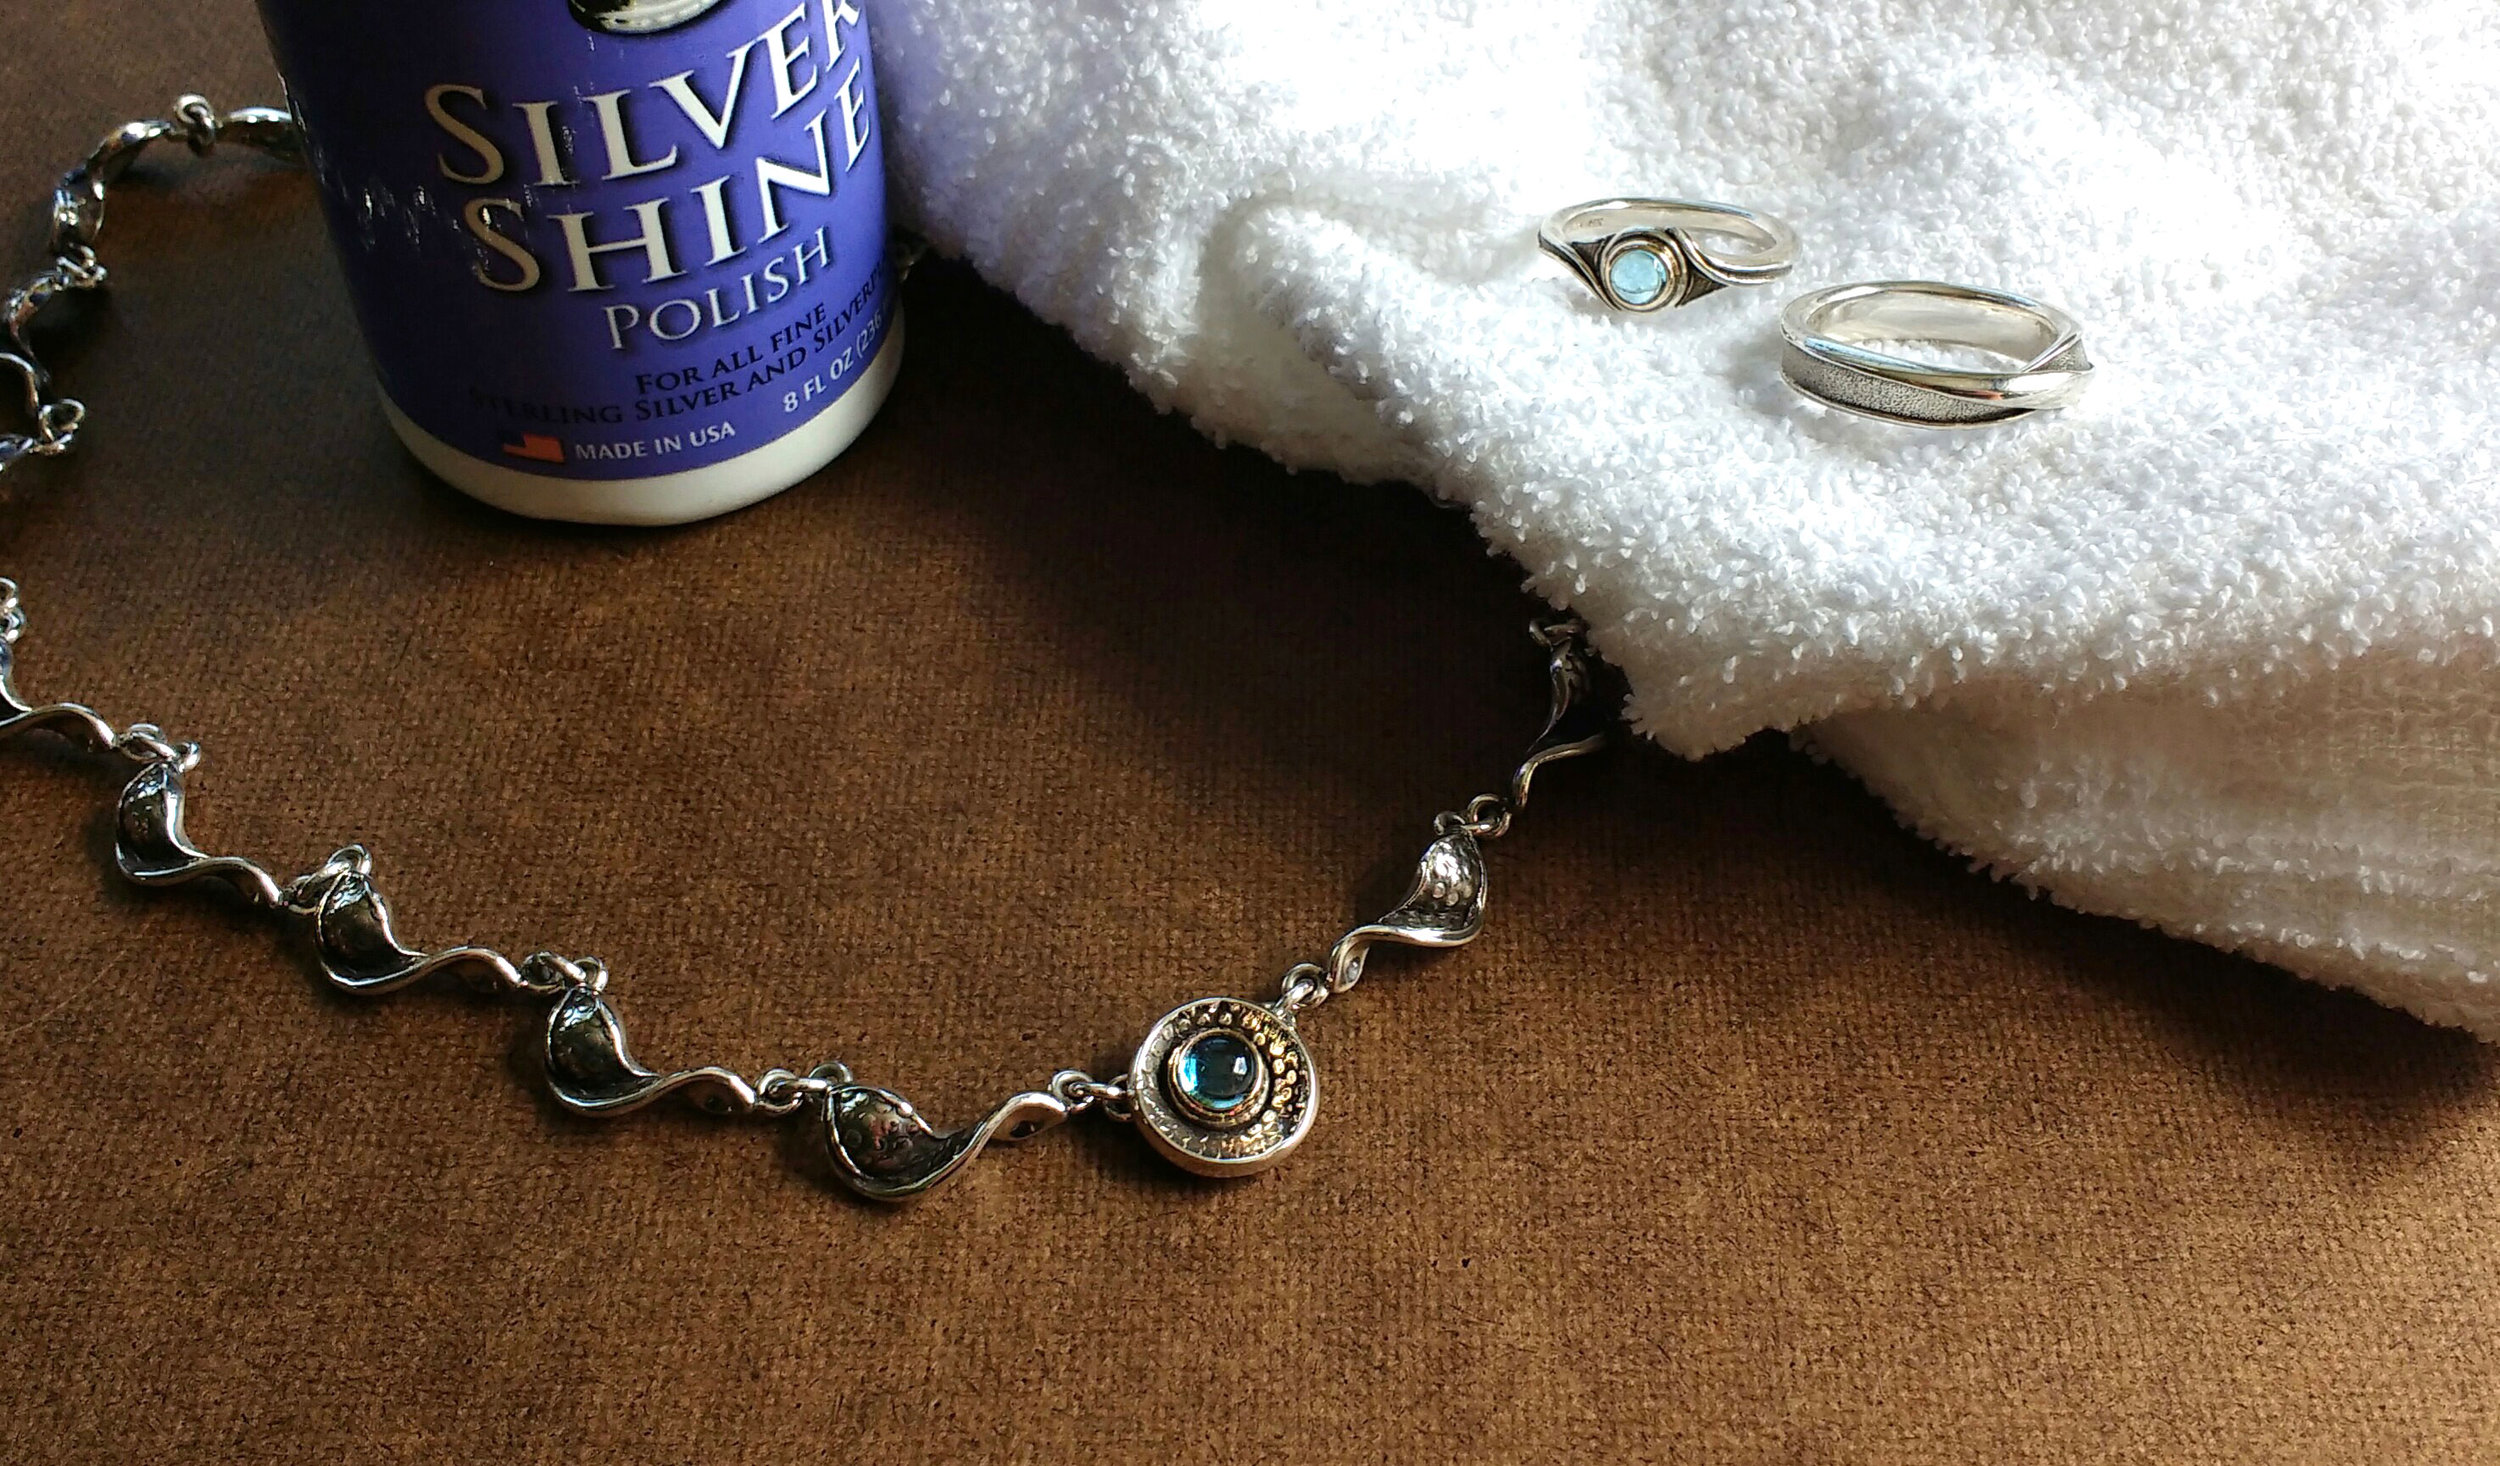 Sterling Silver Jewelry Cleaner: How to Clean Your Sterling Silver